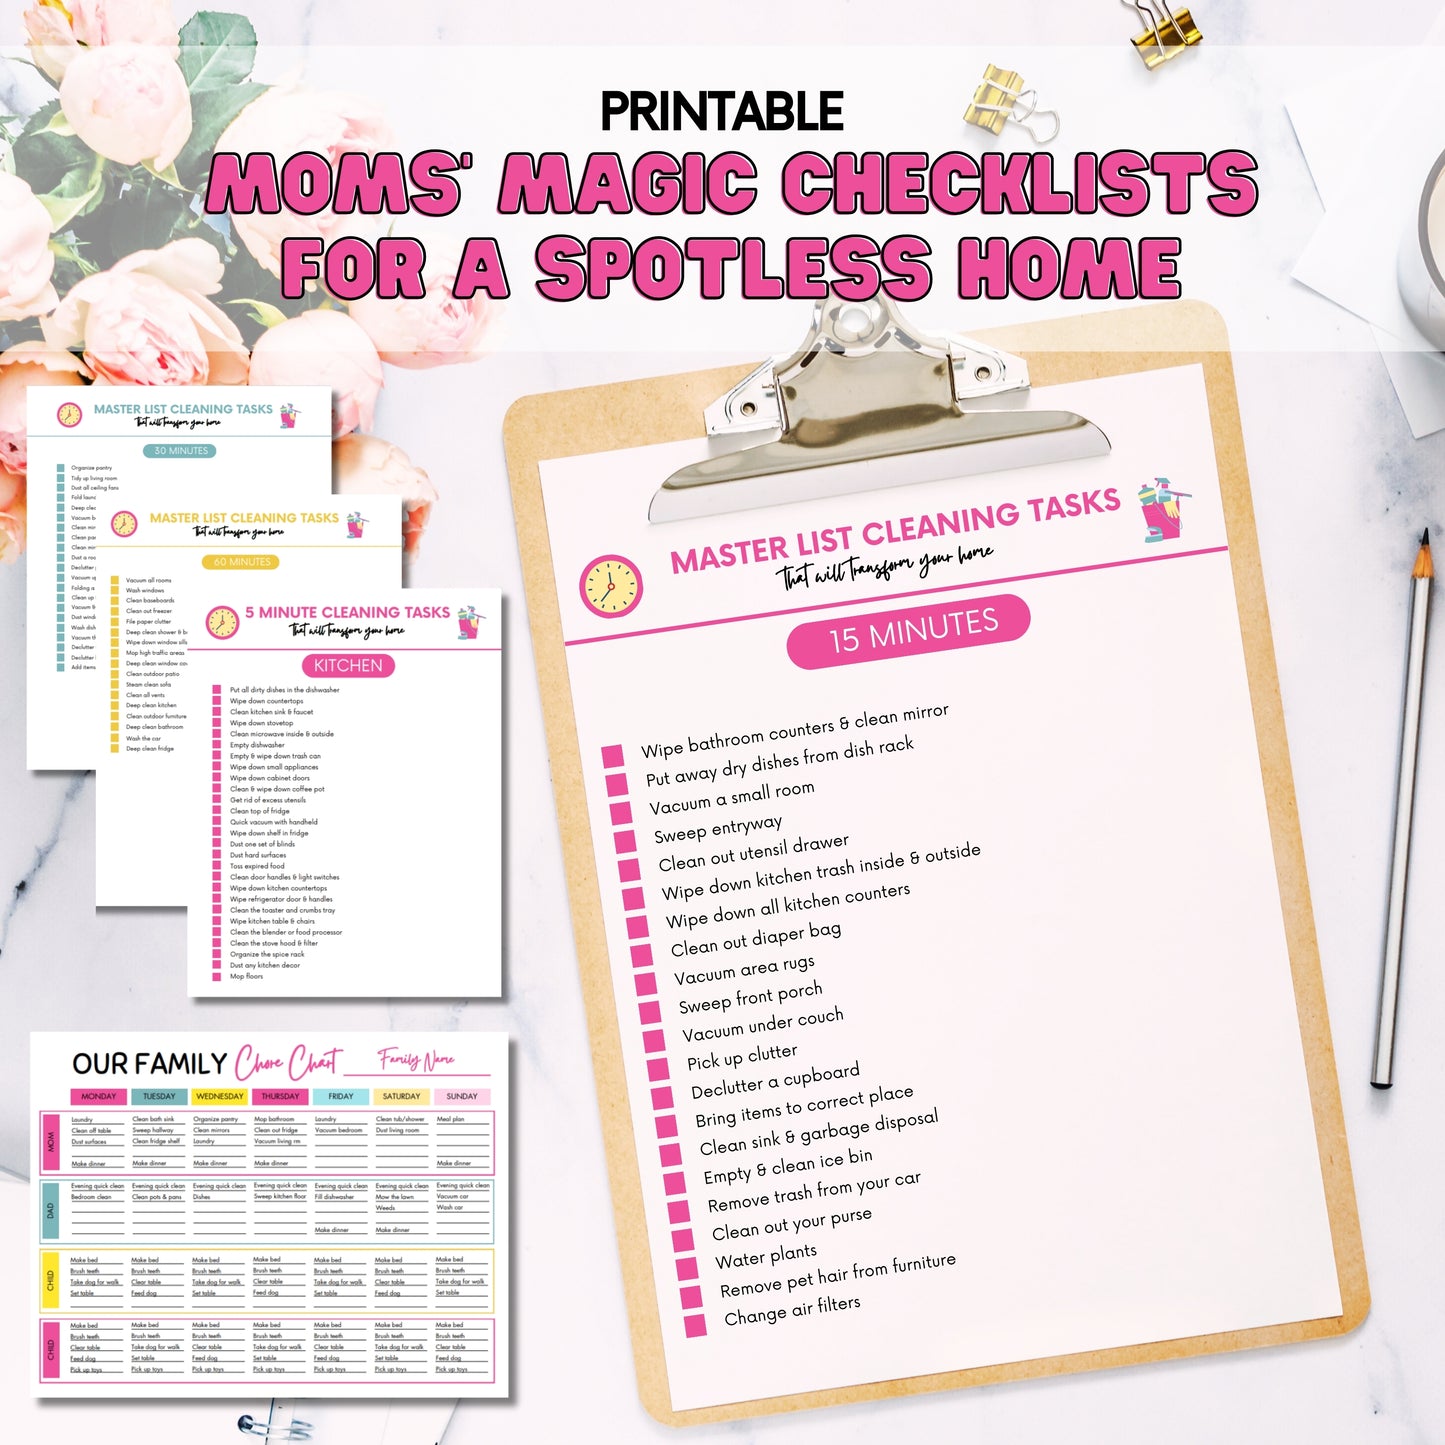 Moms' Magic Checklists for a Spotless Home